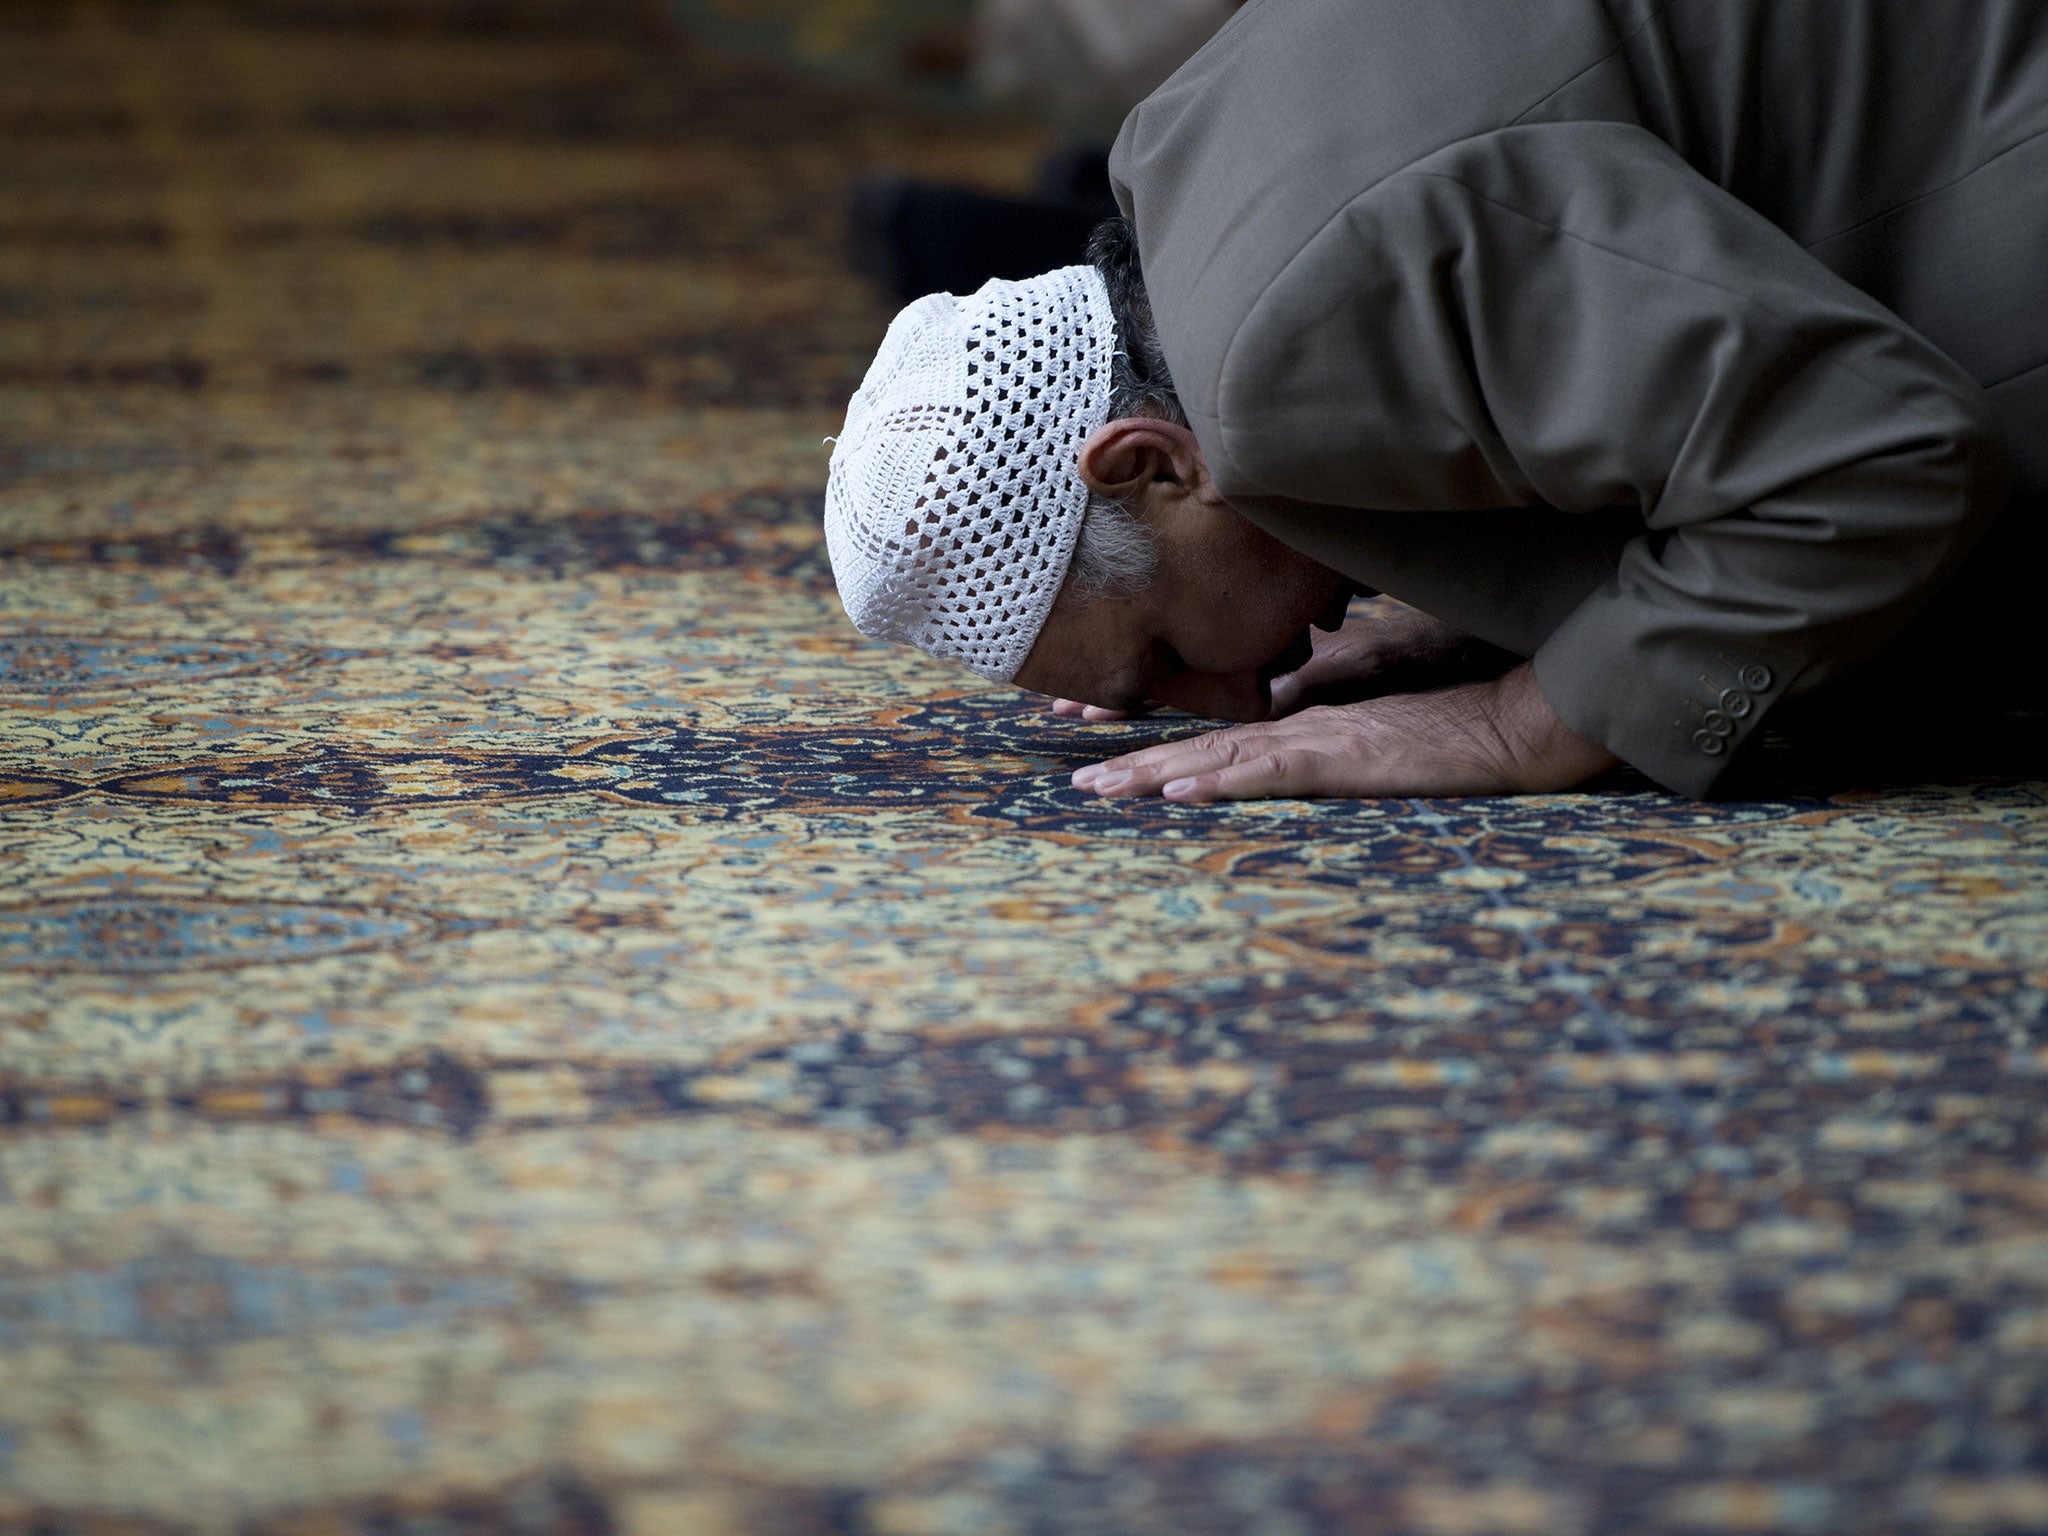 Muslims have taken to Twitter to explain what they believe the Prophet Mohamed taught